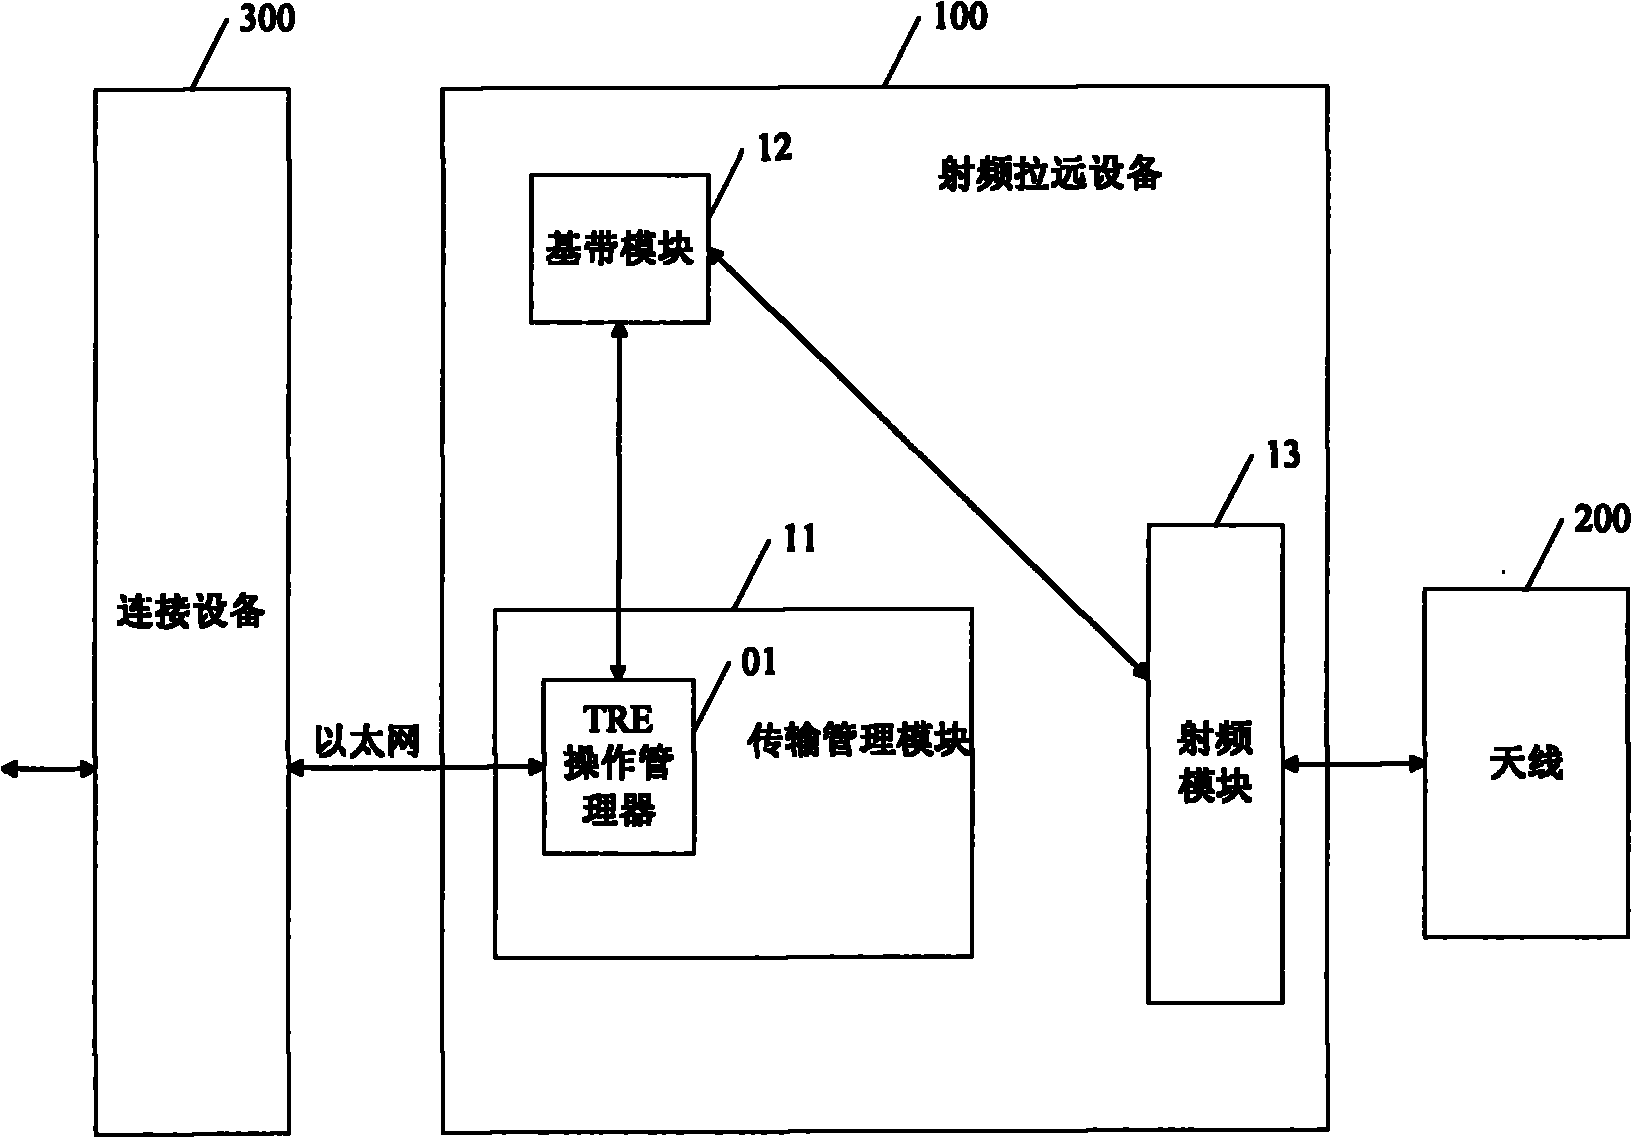 Radio frequency remote equipment and distributed base station